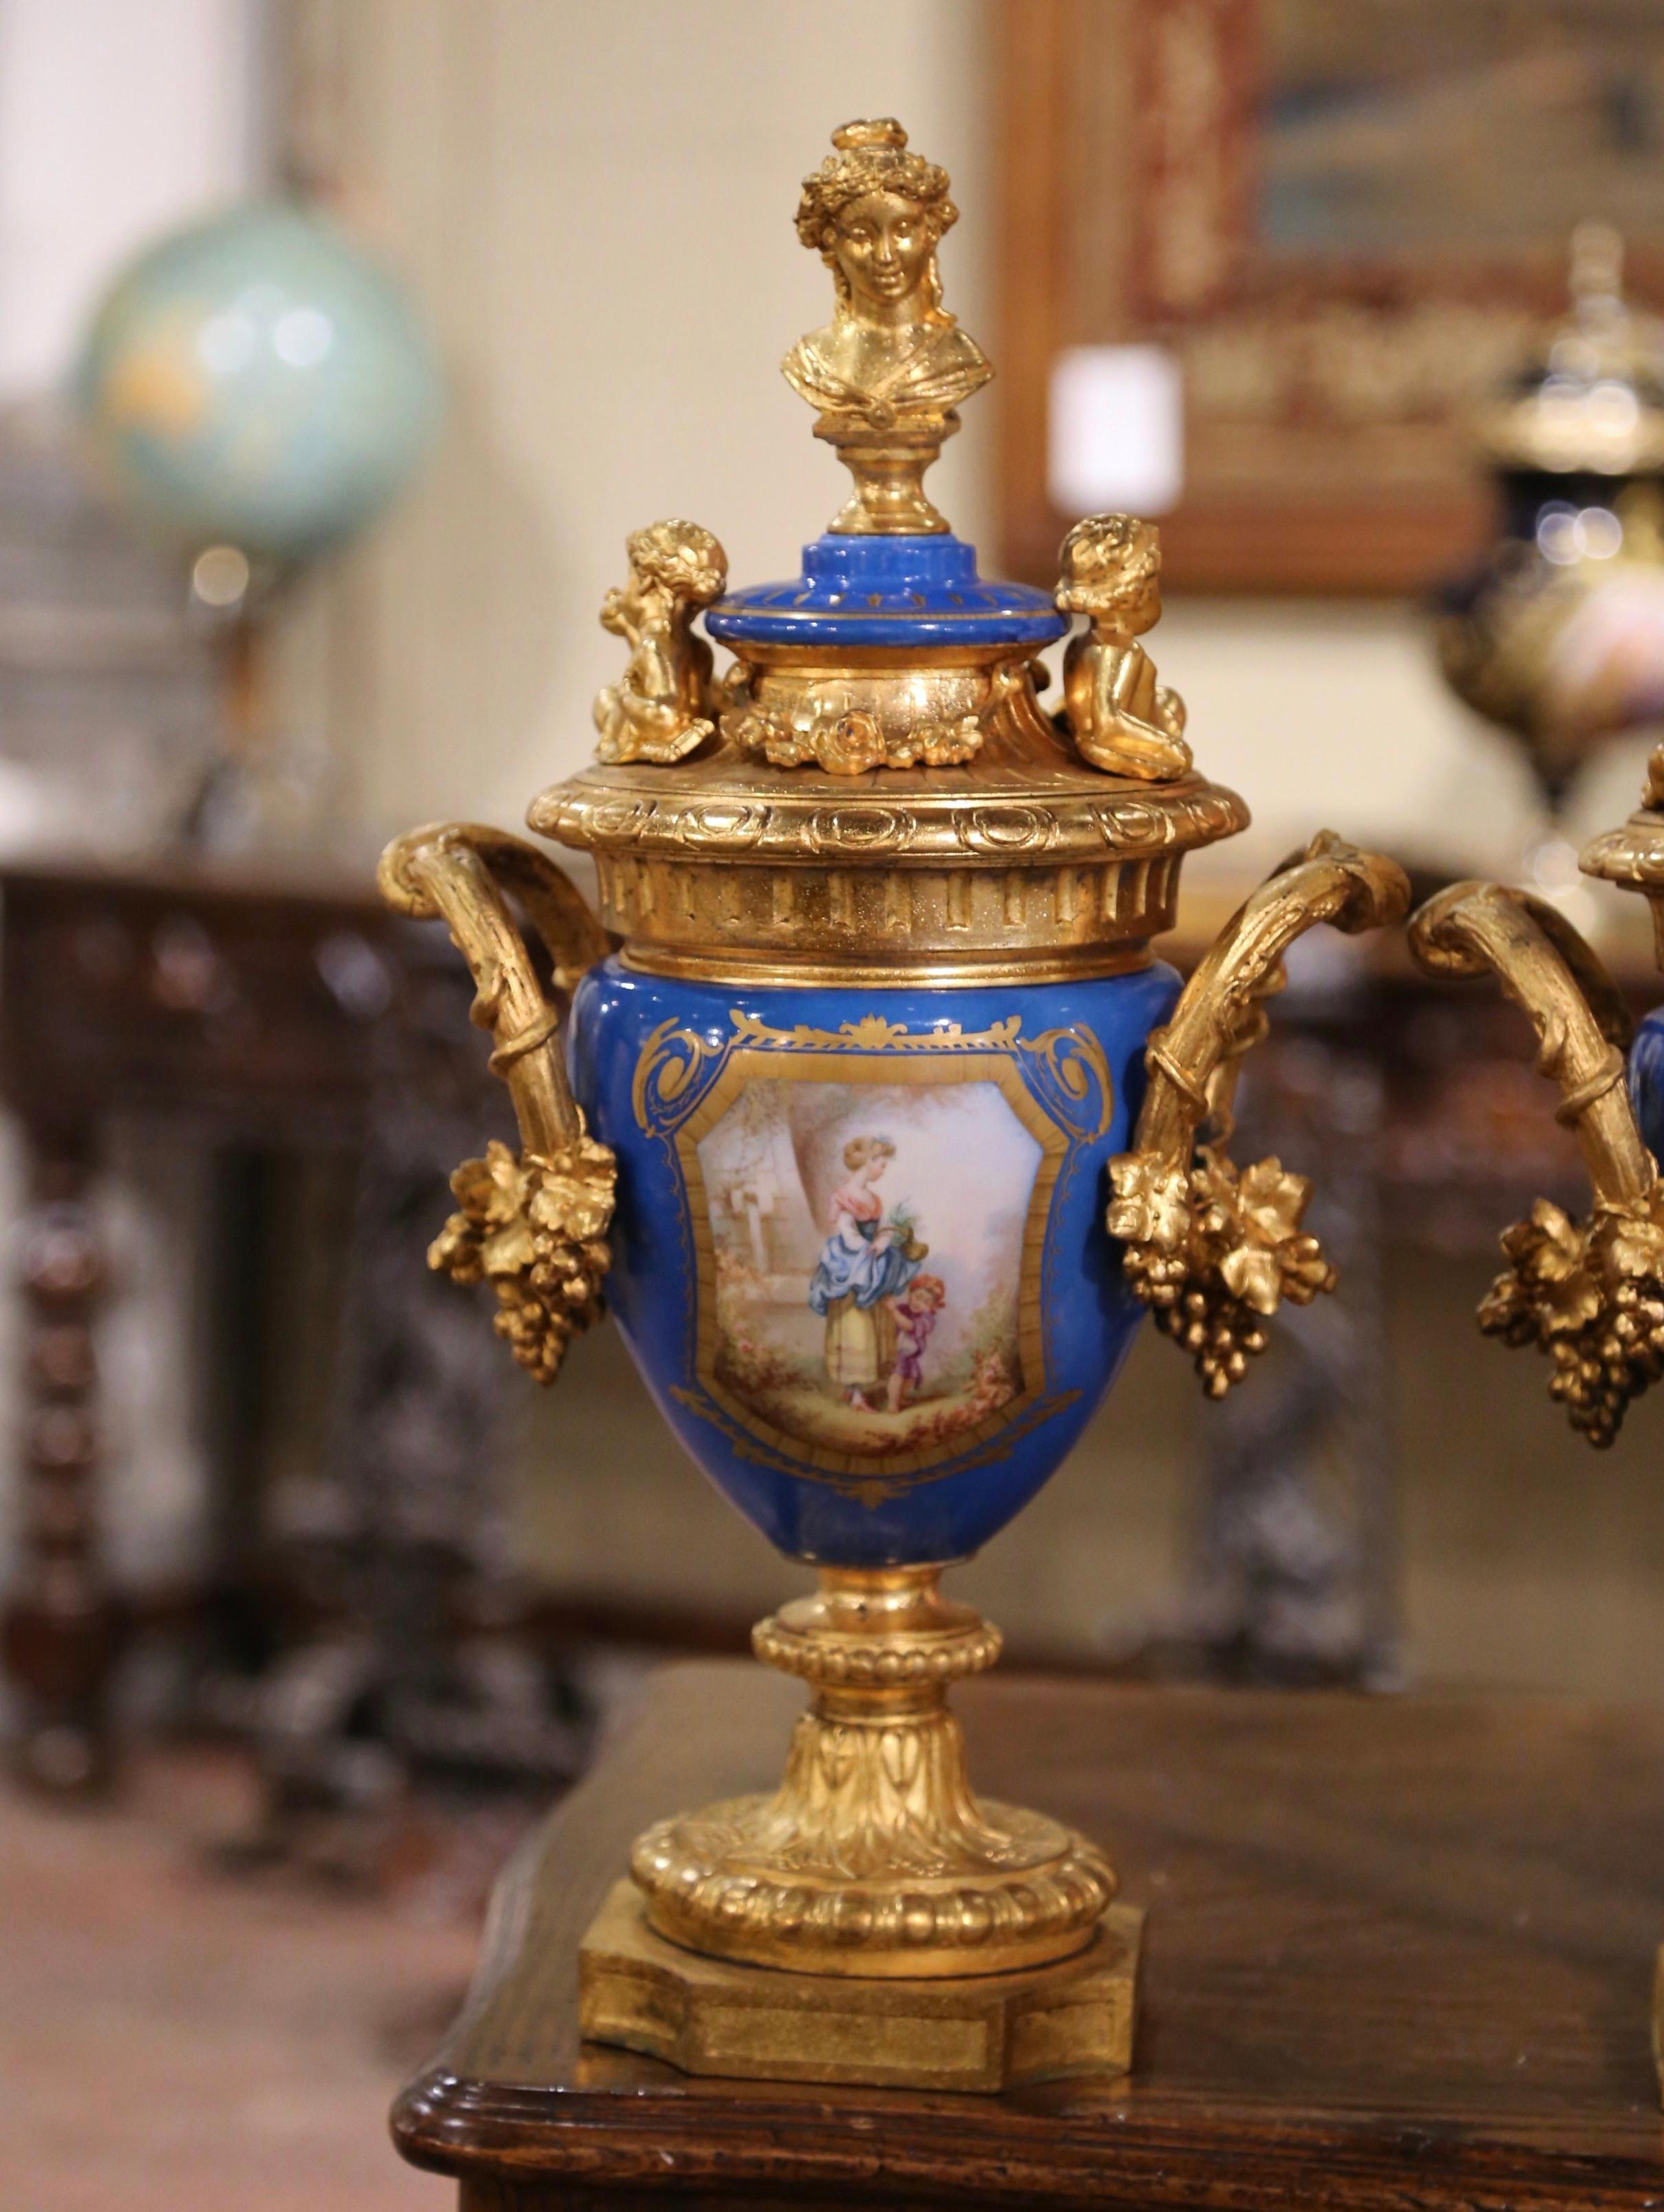 Pair of 19th Century French Blue Porcelain and Gilt Bronze Sèvres Urns Vases In Excellent Condition For Sale In Dallas, TX